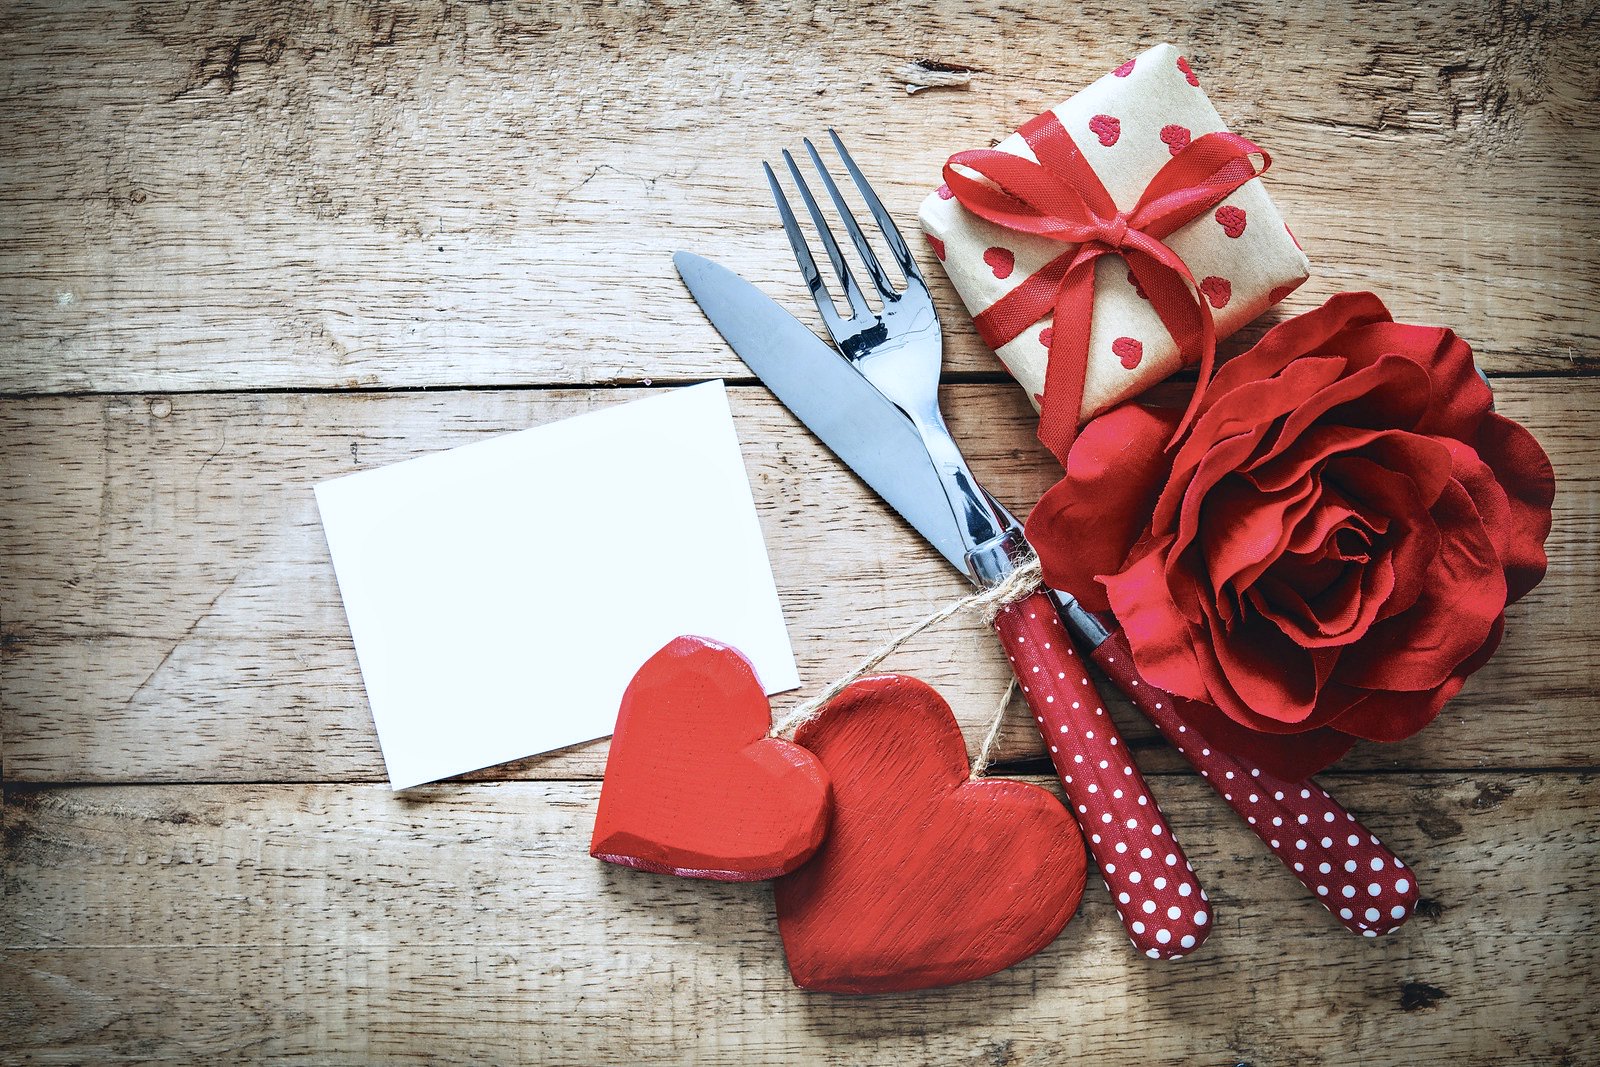 Last Minute Budget-Friendly Valentine’s Day Gift Ideas via Girl With Curves #valentinesday #giftideas #budget #romantic